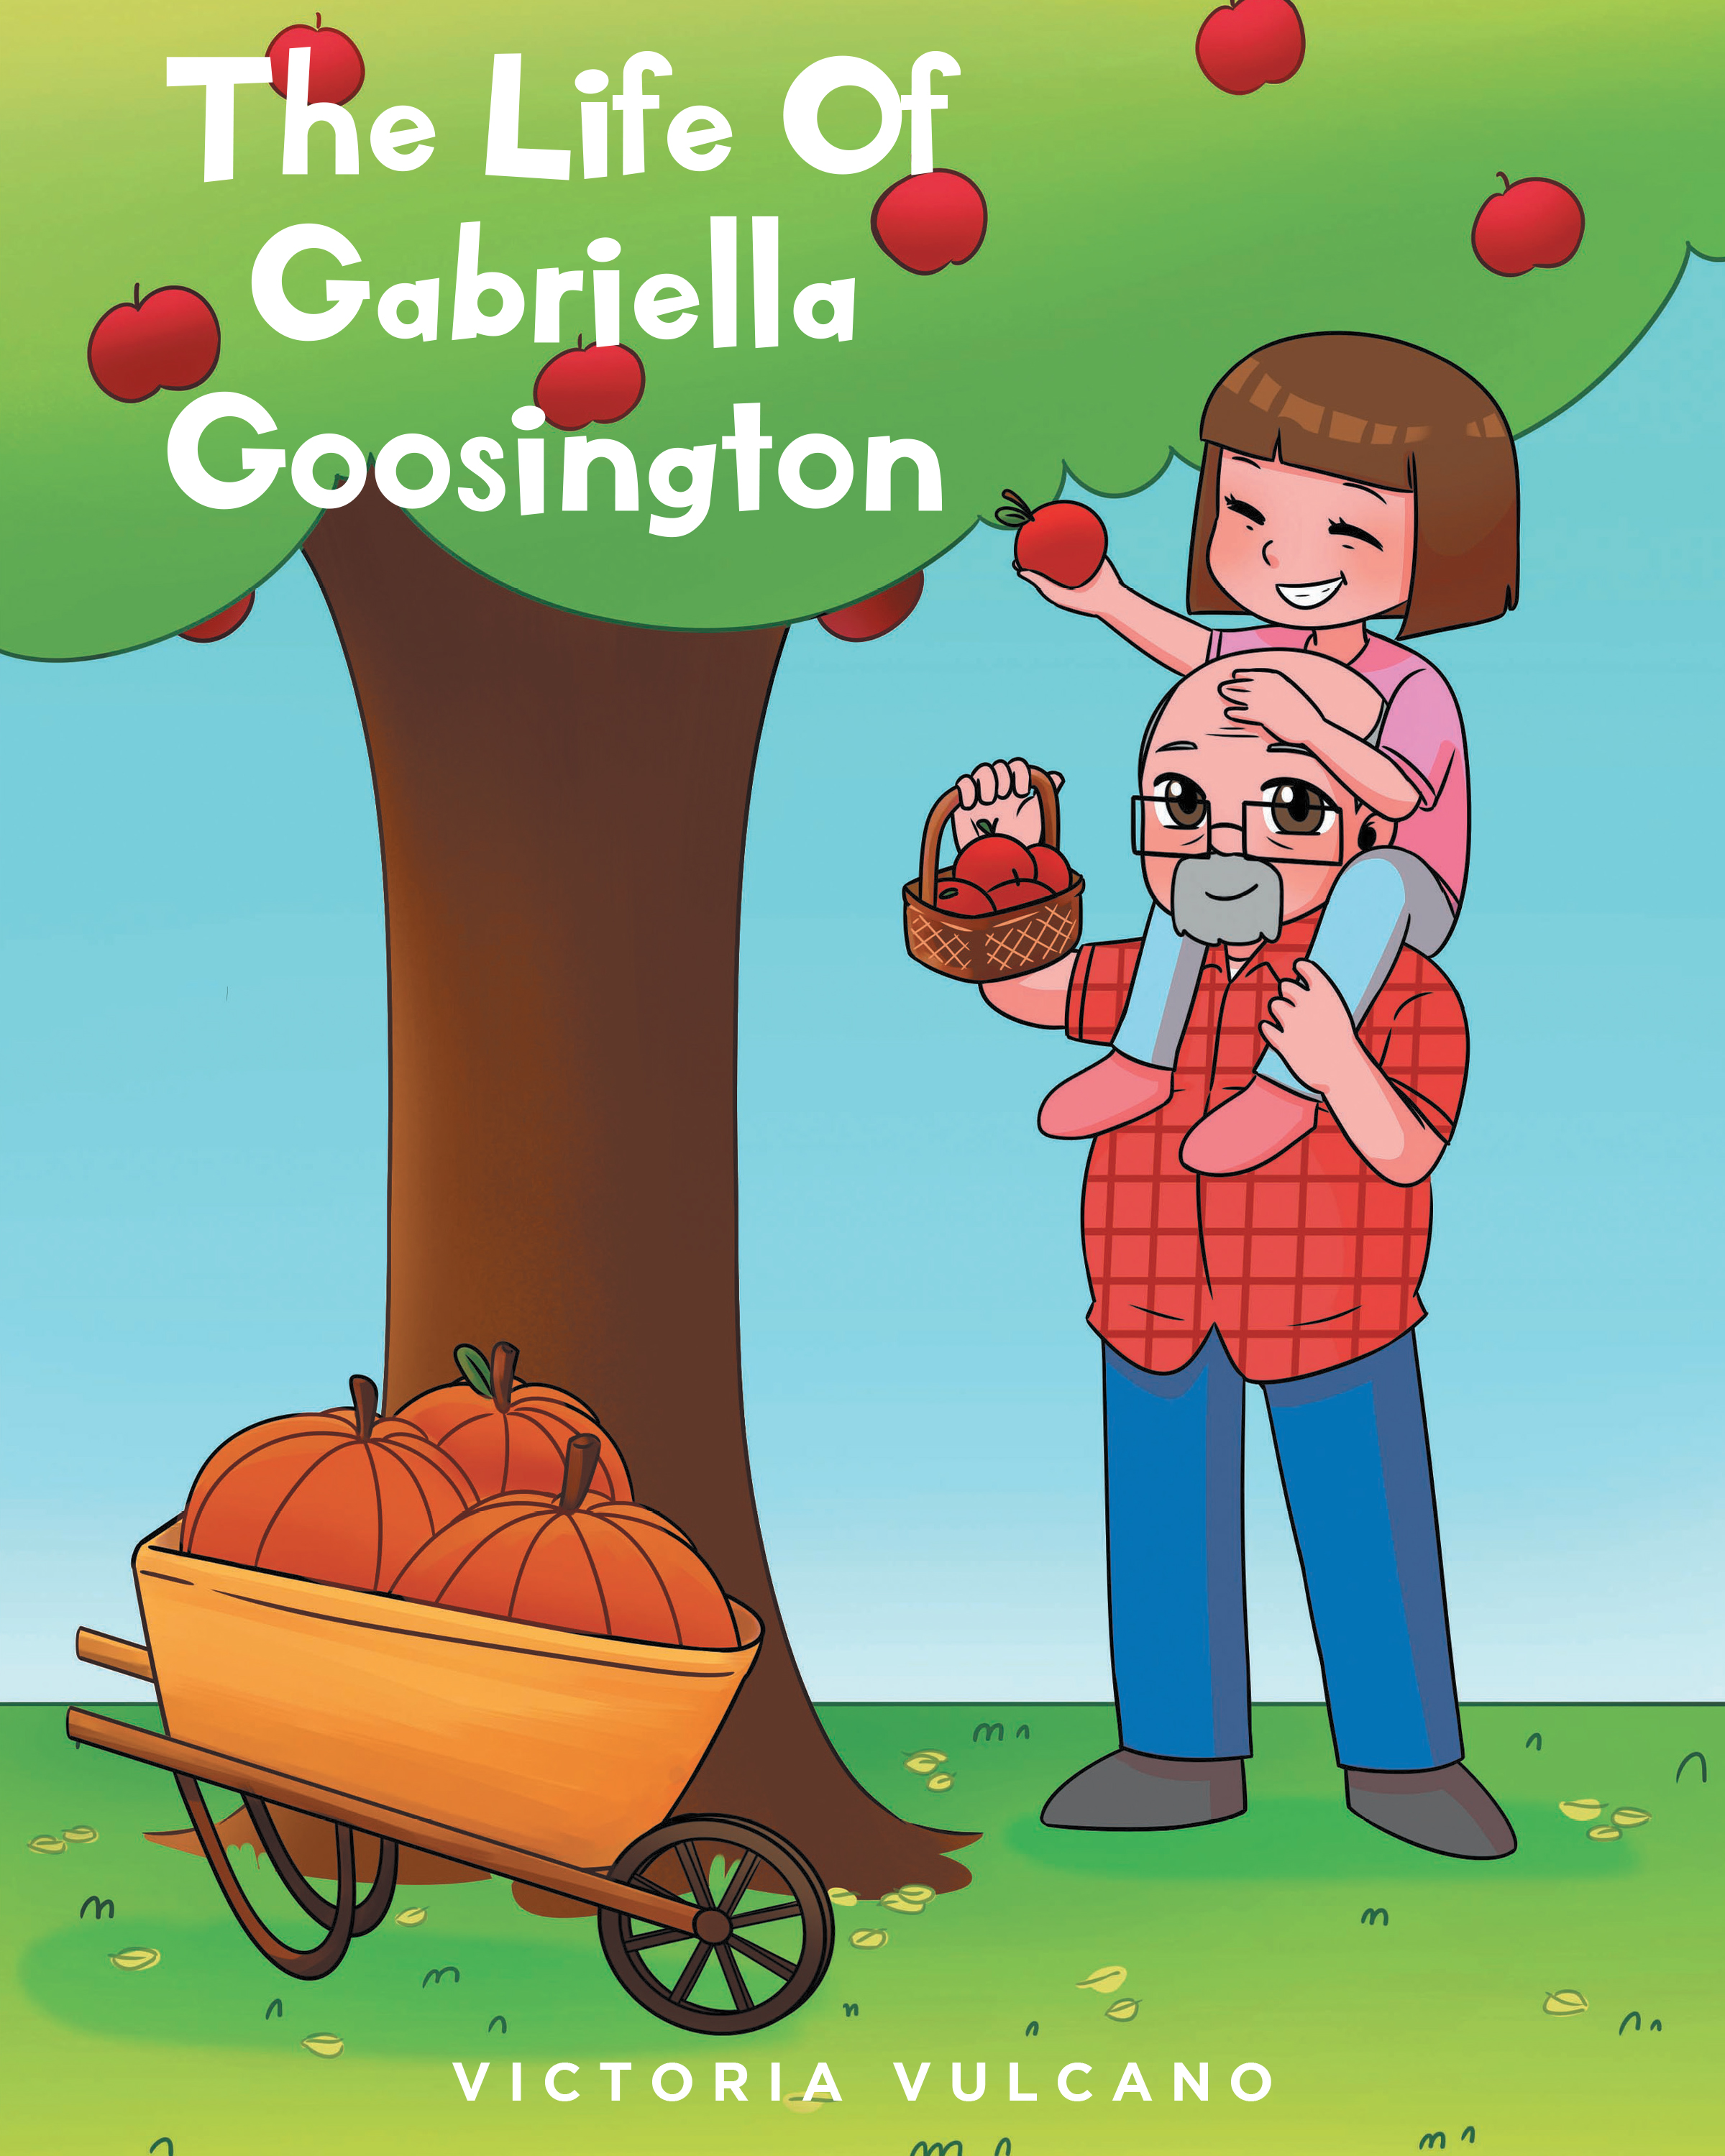 Victoria Vulcano’s New Book, "The Life of Gabriella Goosington," is a Beautiful Story of the Special Connection Between a Young Girl and Her Beloved Grandfather